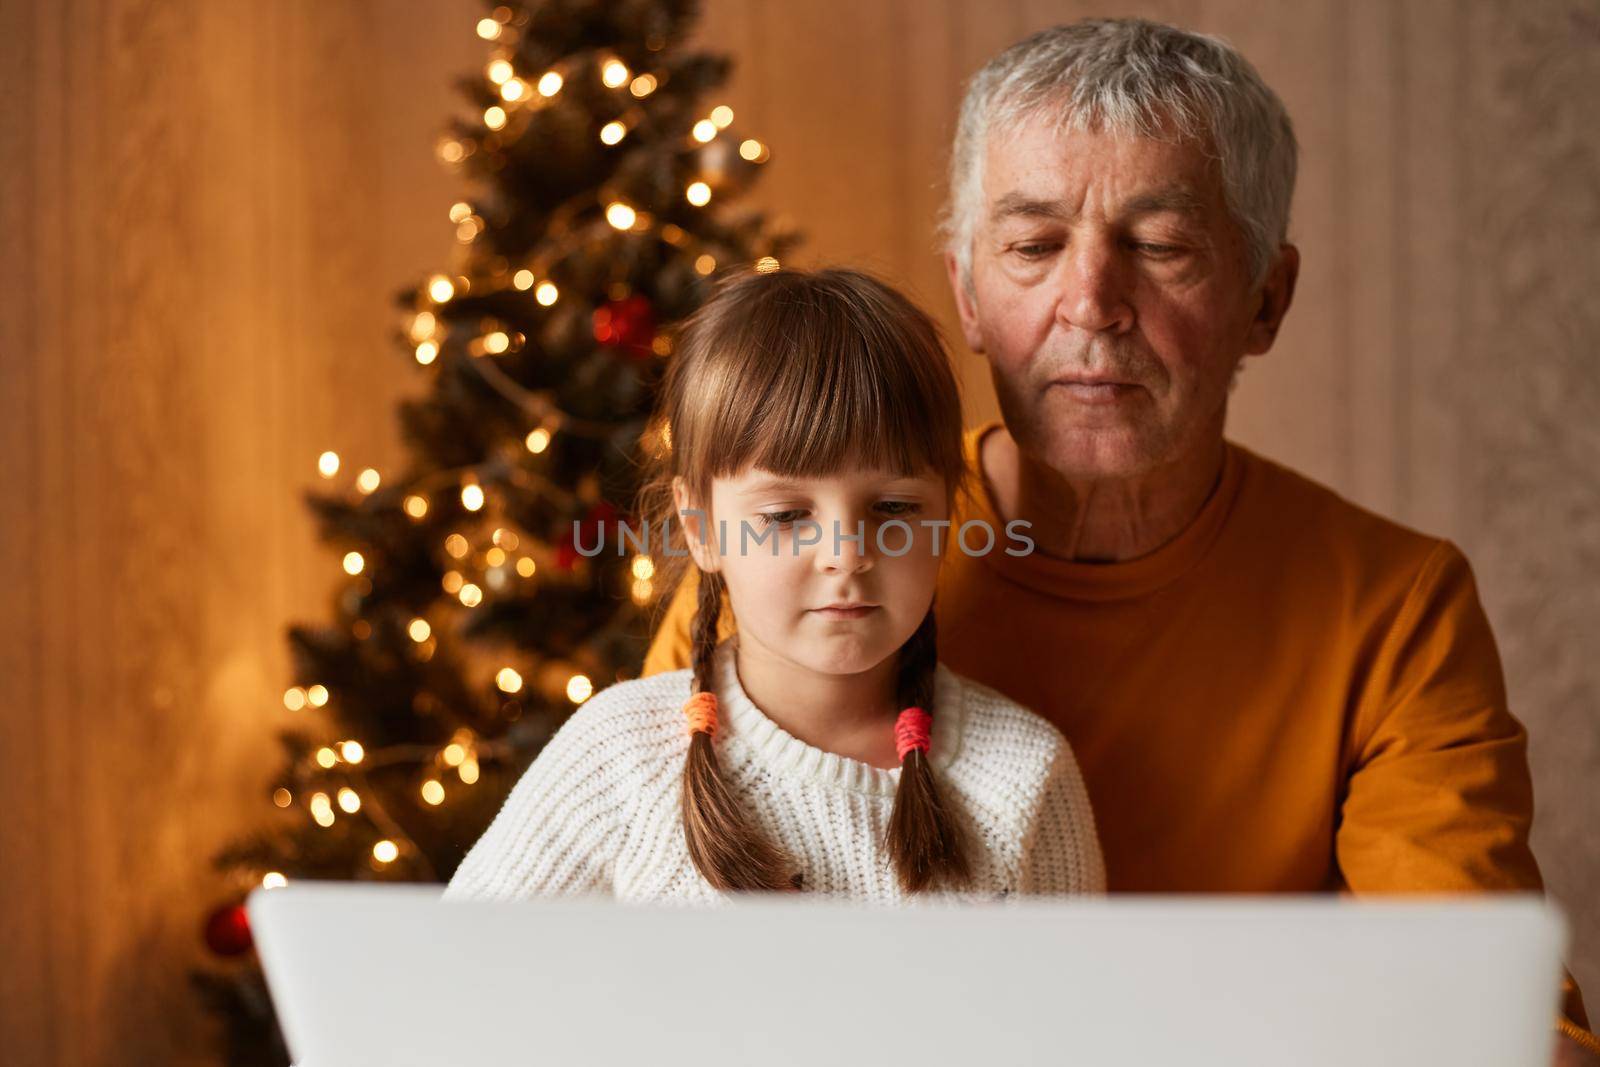 Indoor shot of mature man wearing orange sweater and little girl sitting in front of laptop with Christmas tree on background, looking at monitor with serious concentrated expression. by sementsovalesia